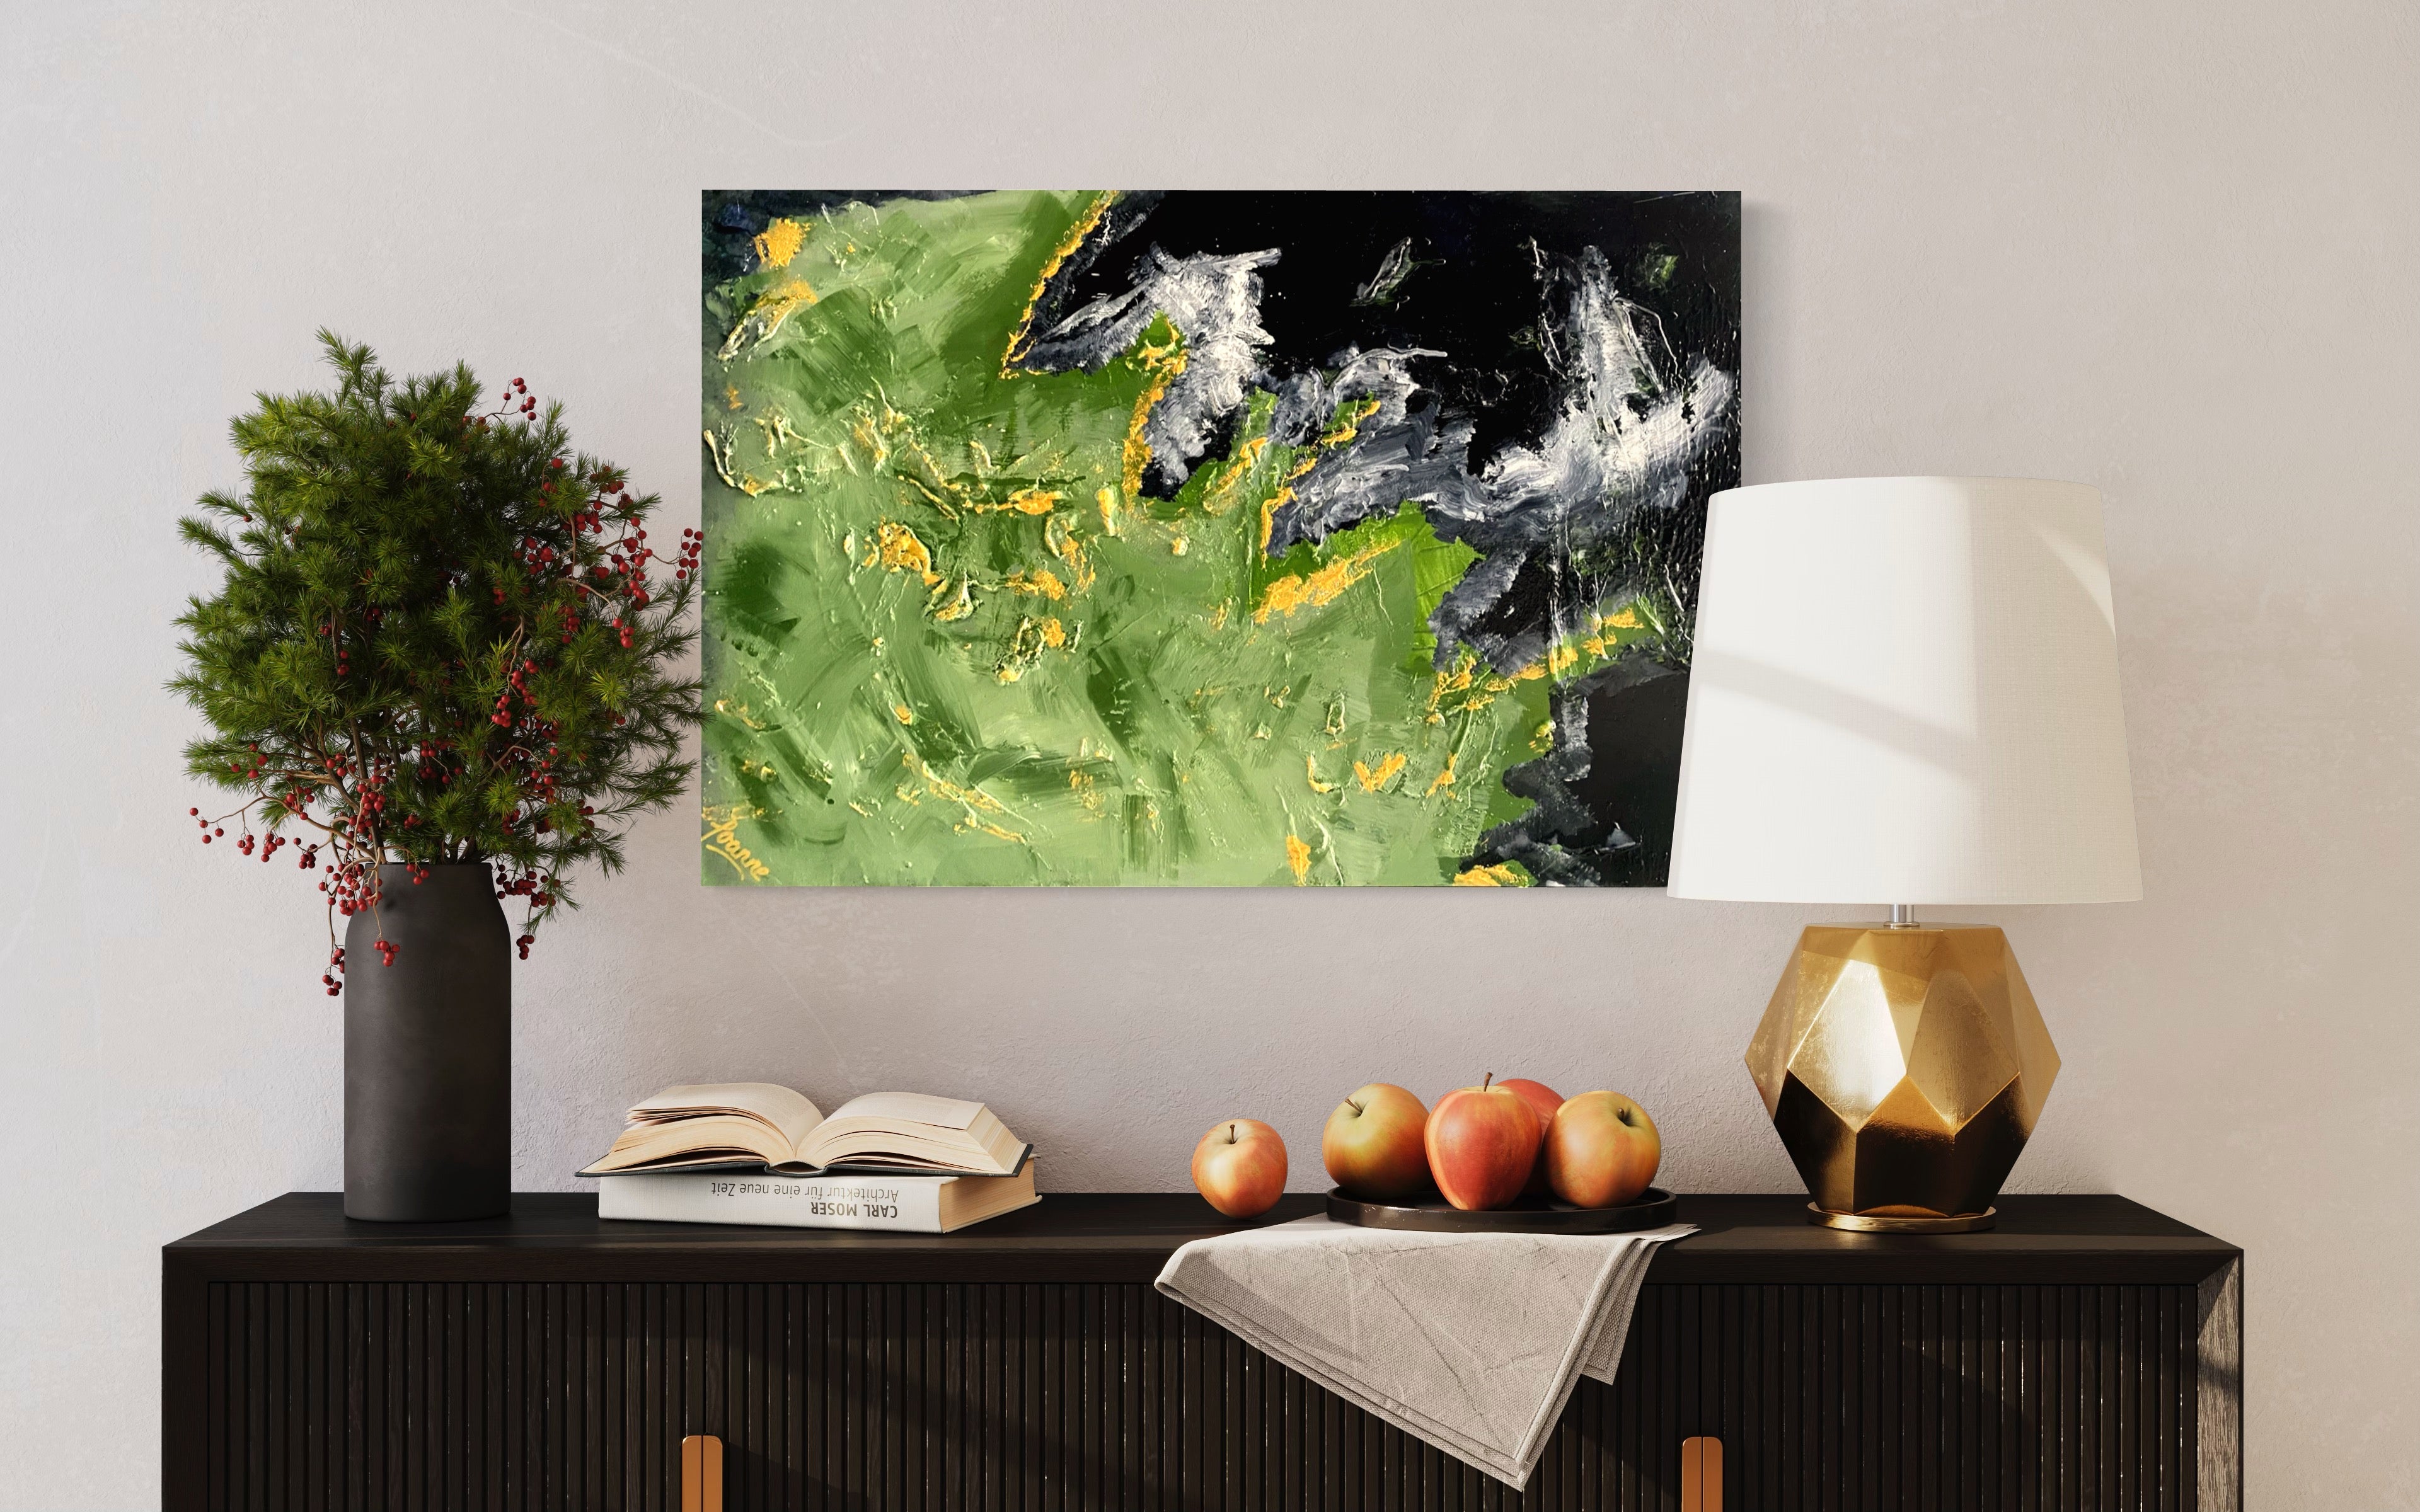 Alpine Mountains 93 cm x 61 cm Black Green Textured Abstract Painting